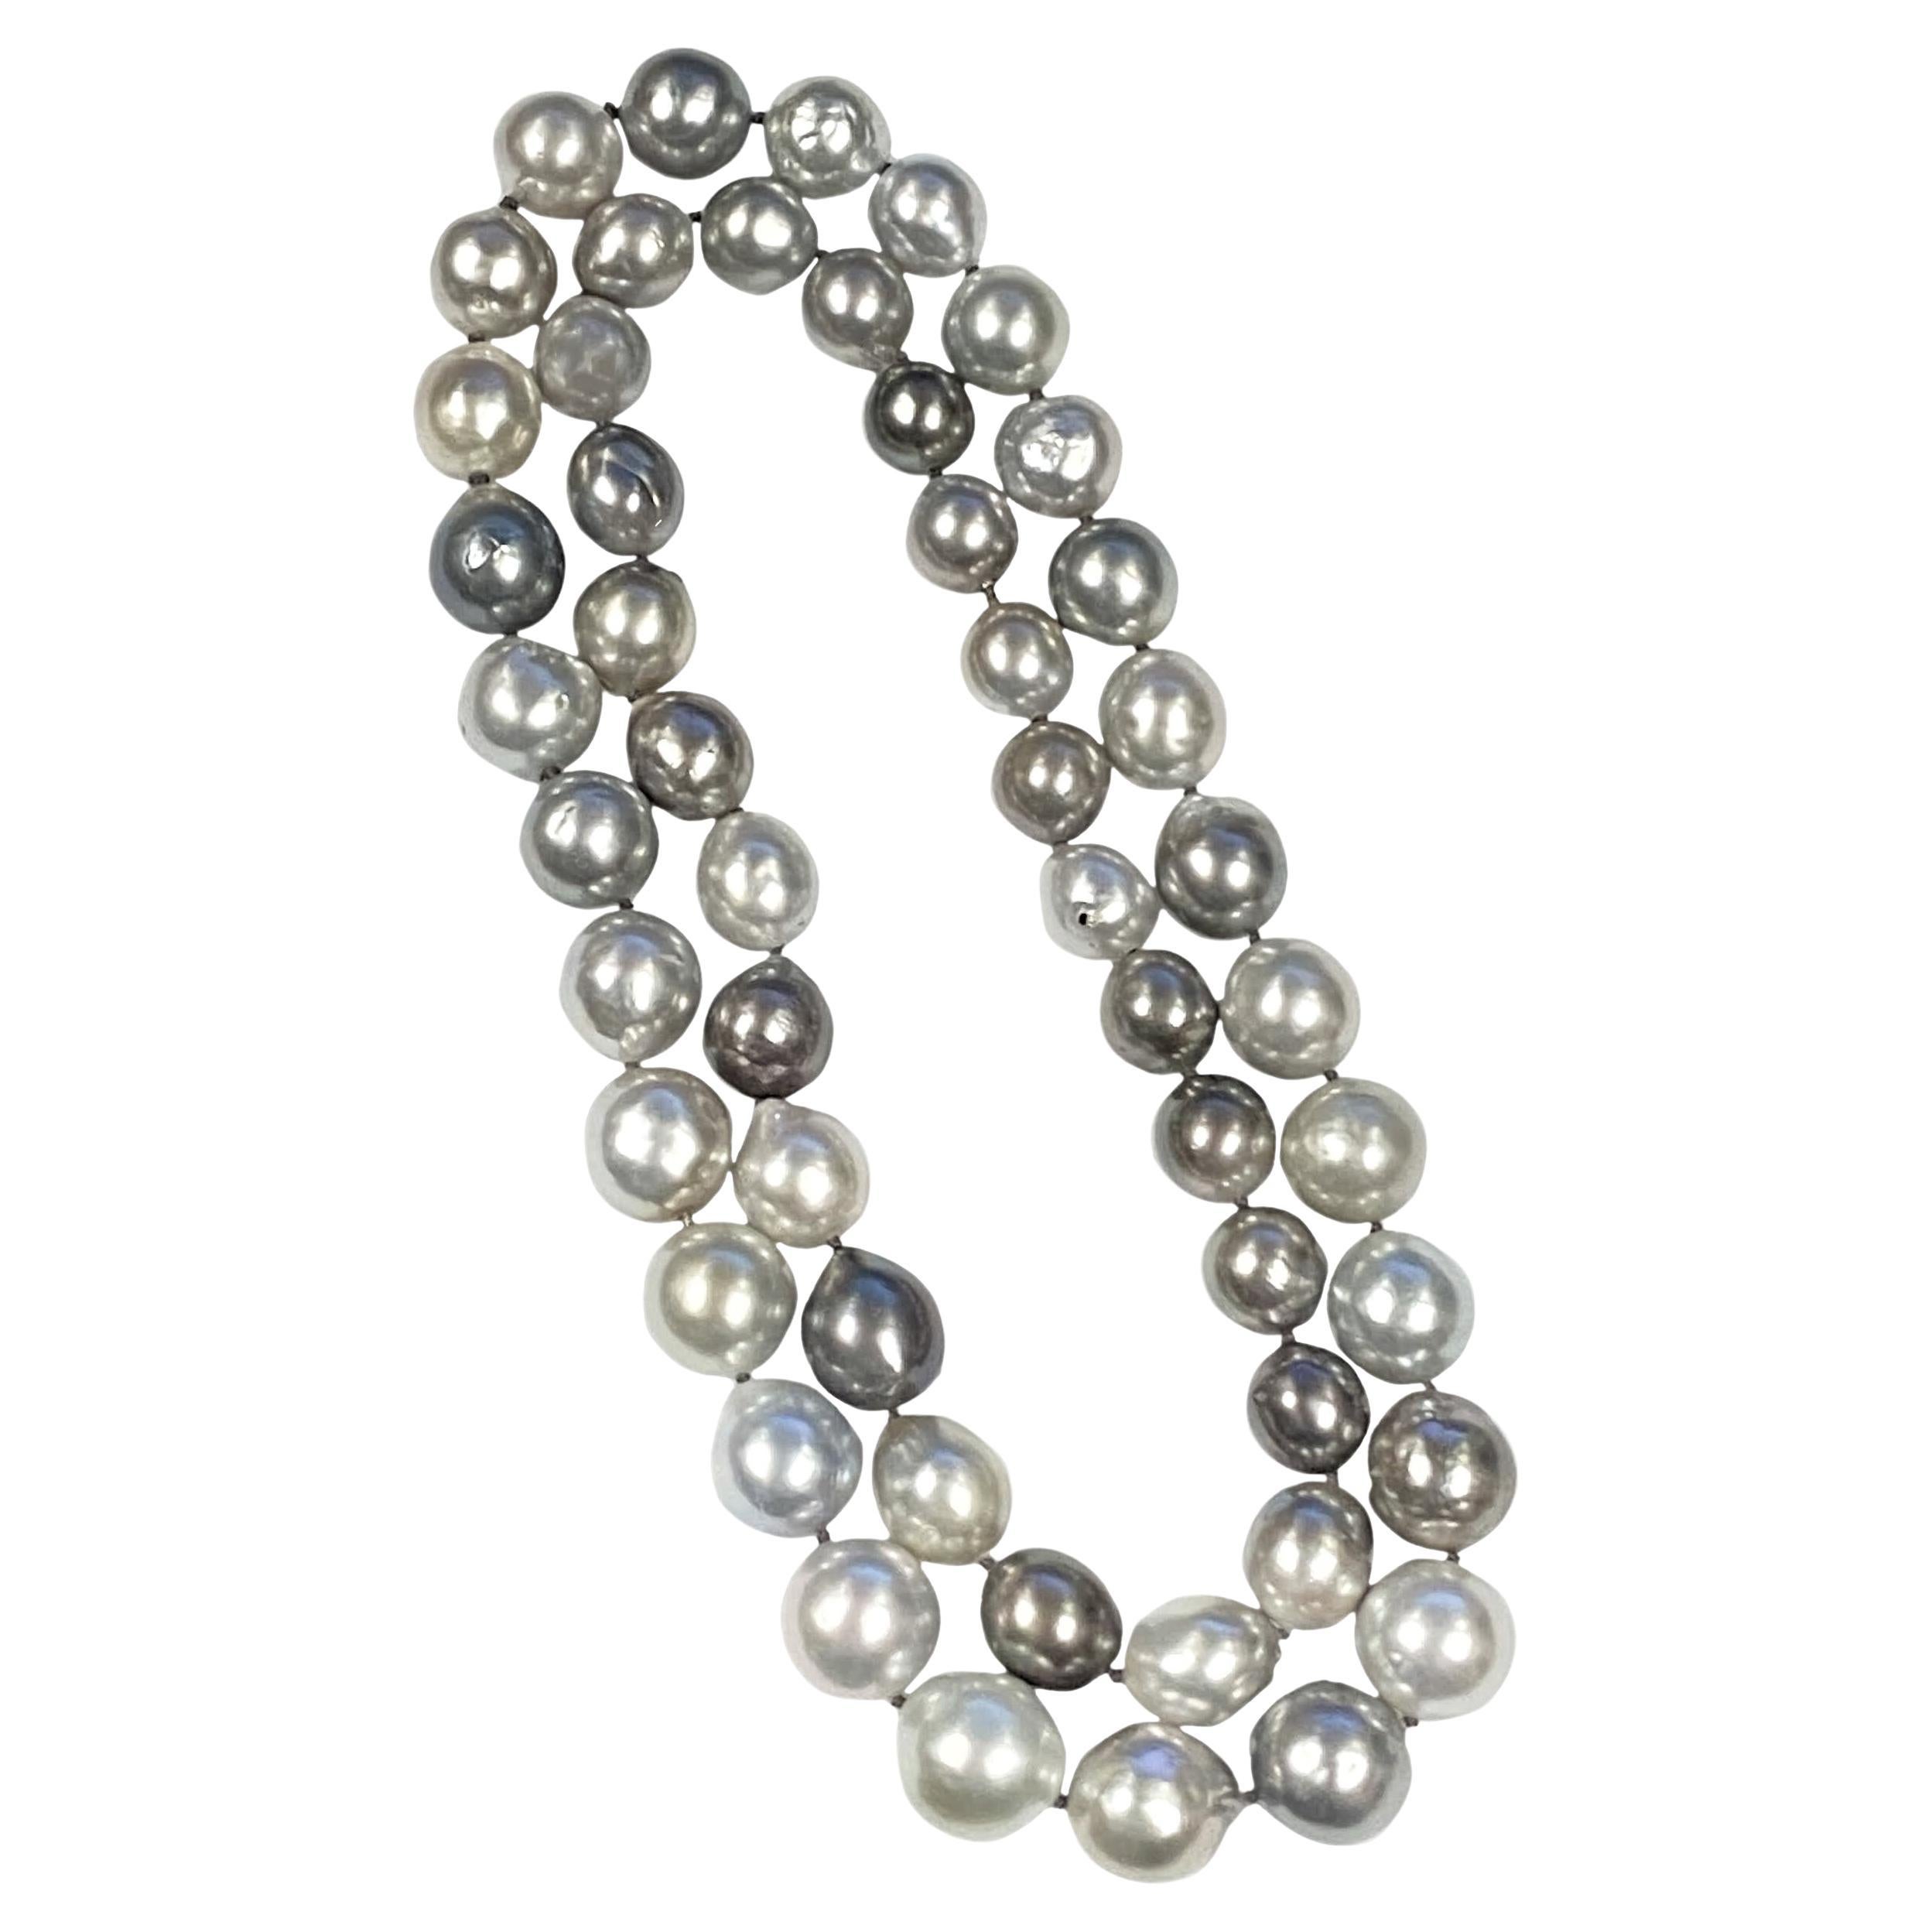 South Sea Gray Tahitian Large Baroque Pearls Necklace or 2 Chokers